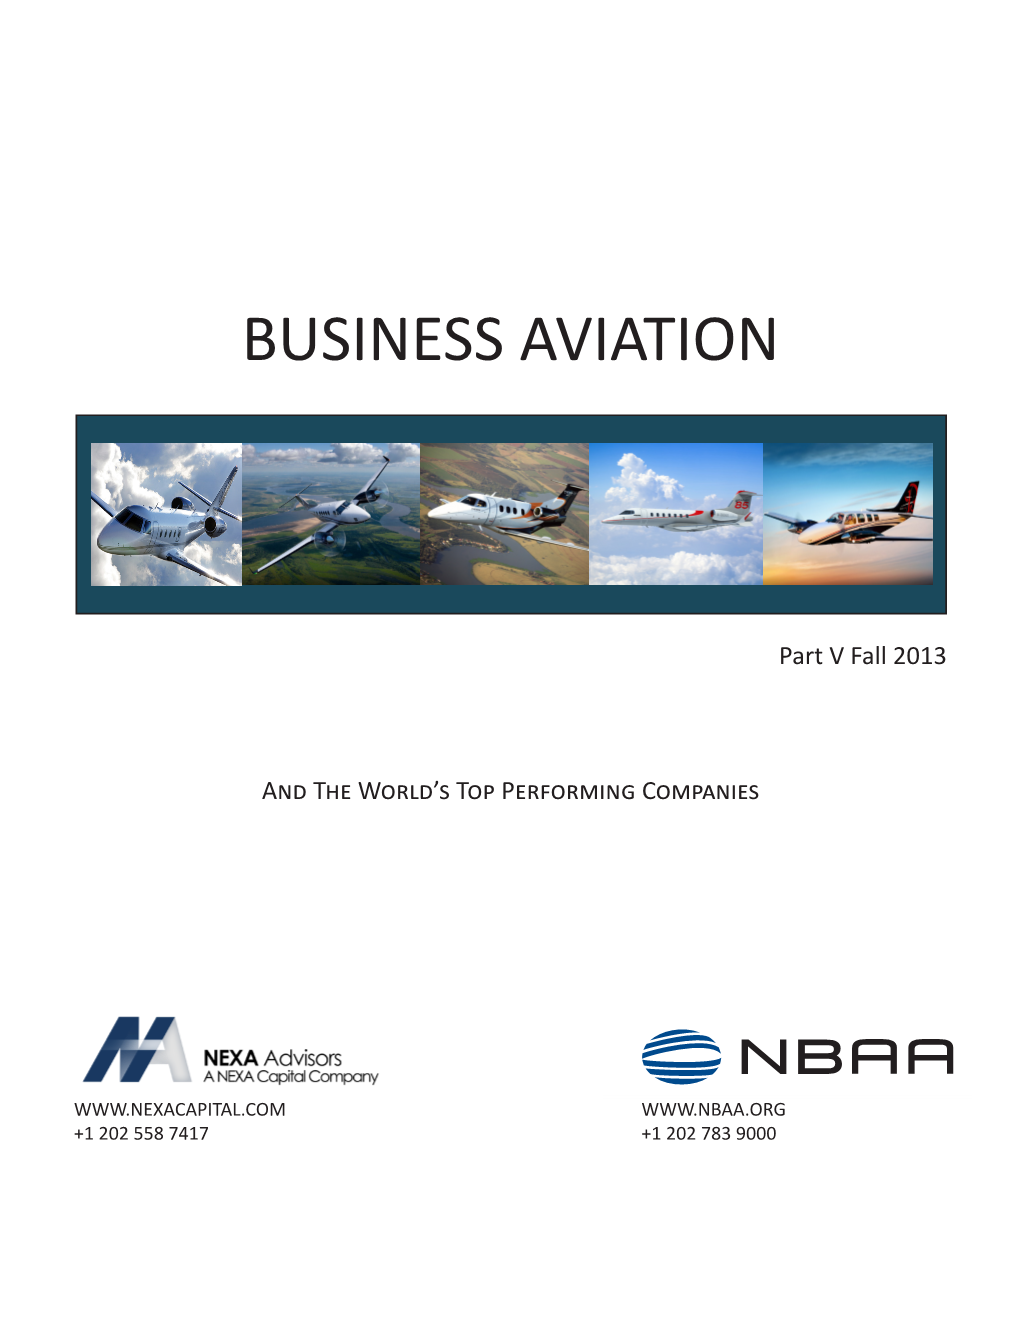 Business Aviation and the World's Top Performing Companies